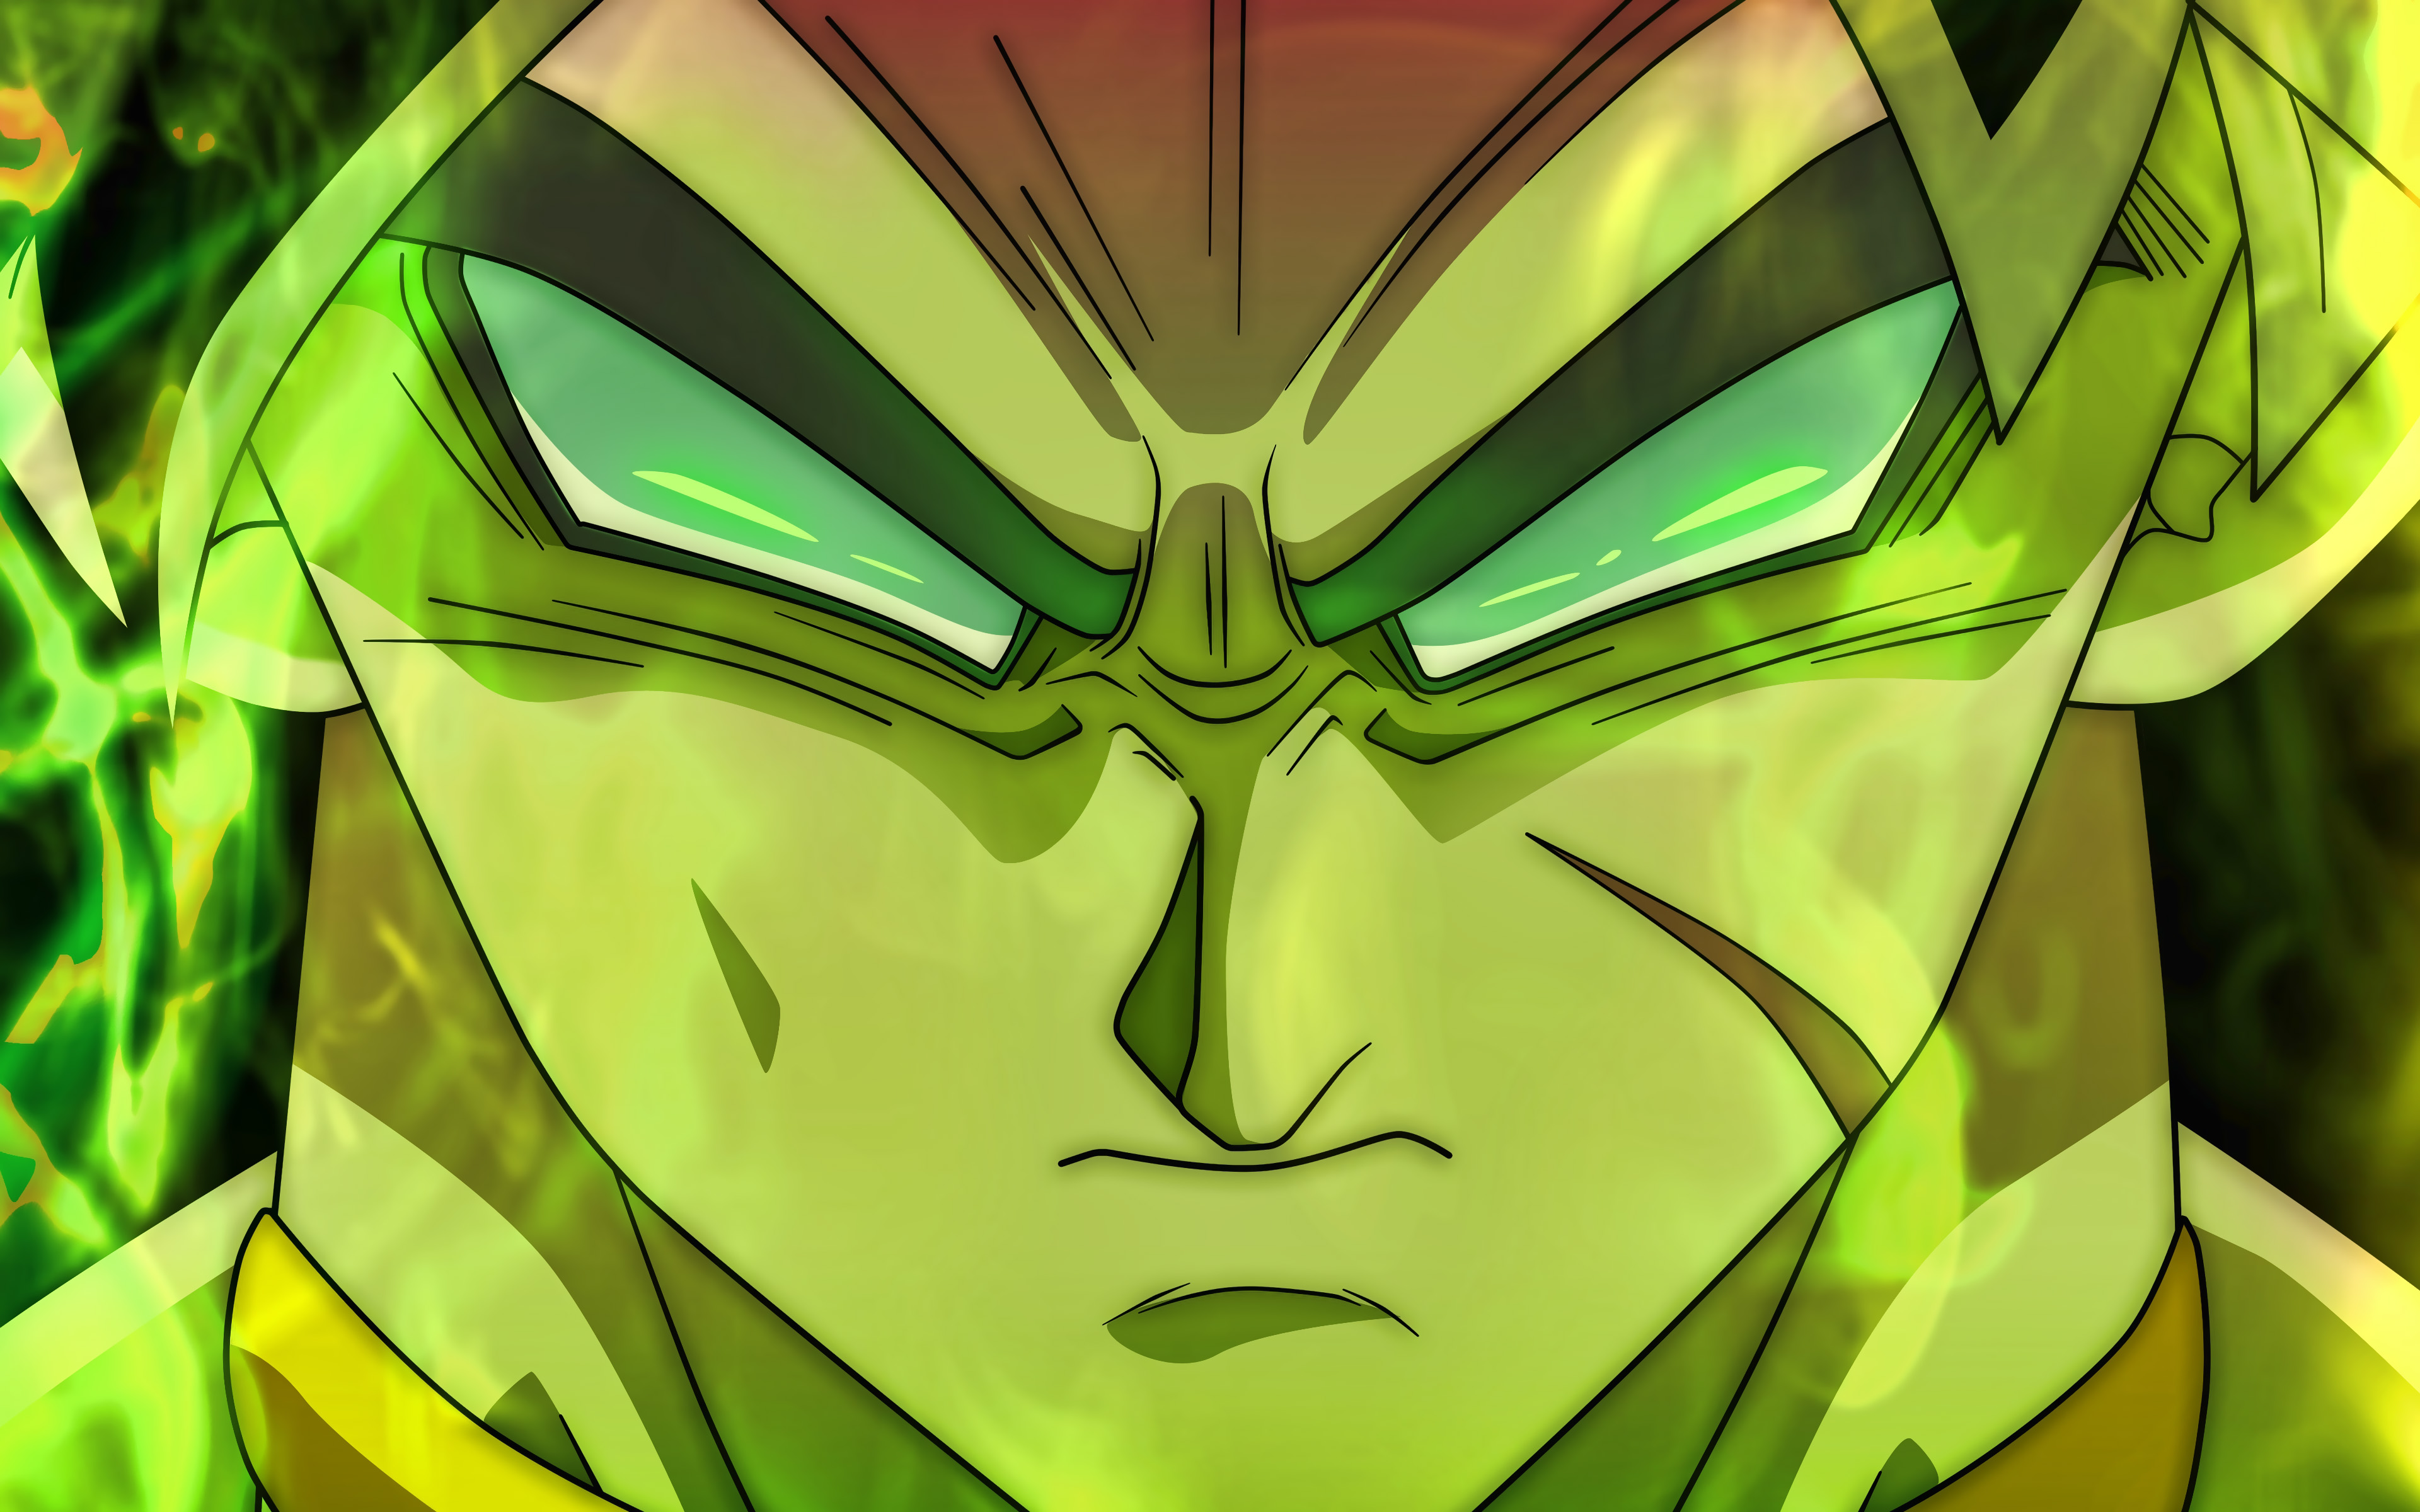 Download wallpapers 4k, Broly, close-up, Dragon Ball, artwork, DBS, Dragon  Ball Super, DBS characters, Broly 4k for desktop with resolution 3840x2400.  High Quality HD pictures wallpapers